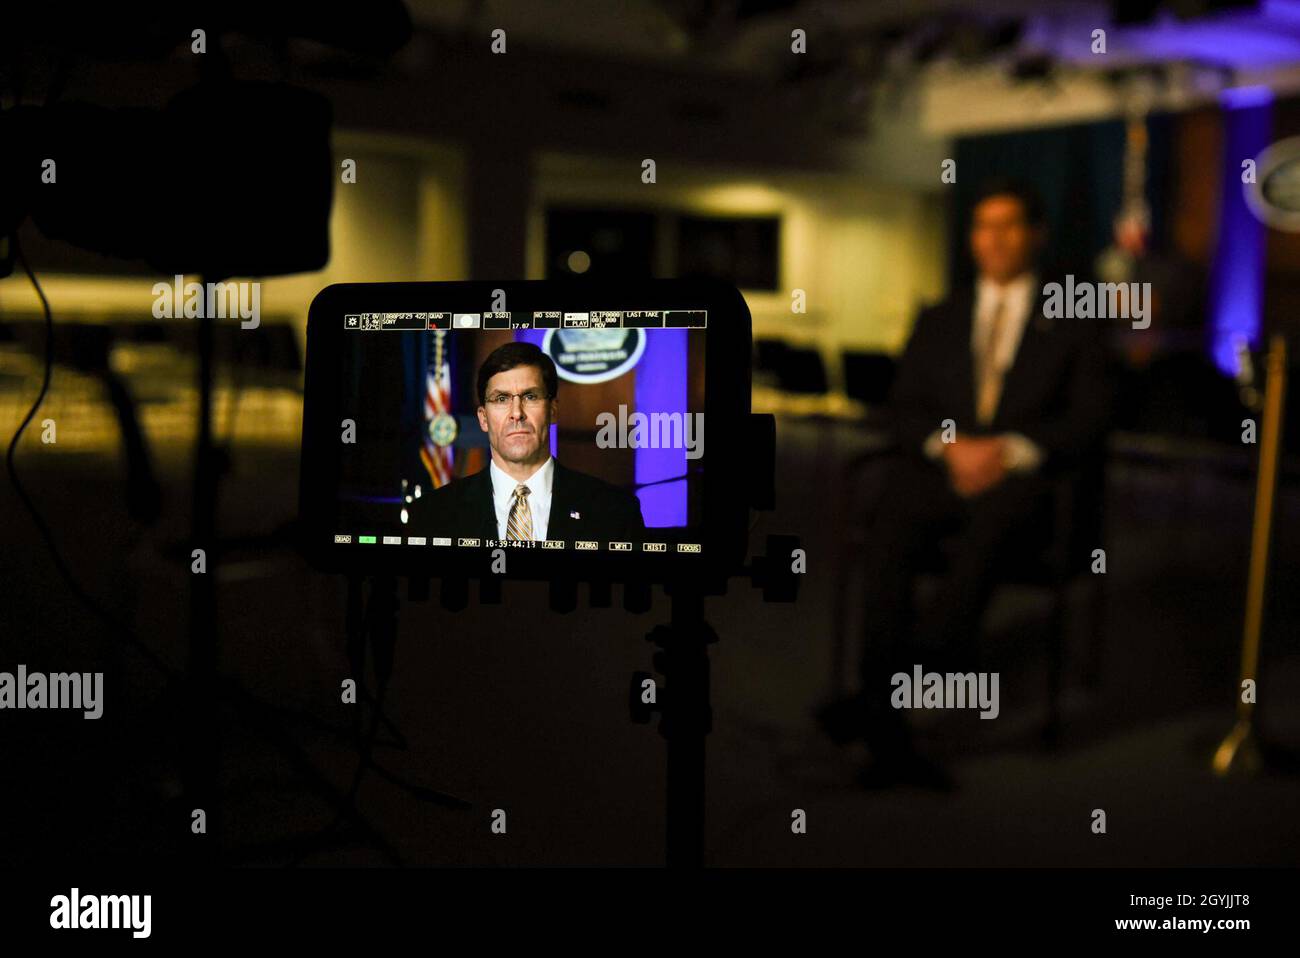 Defense Secretary Mark T. Esper sits for a video interview with CNN International's Christiane Amanpour, at the Pentagon, Washington, D.C., Jan. 7, 2020. (DoD photo by Navy Petty Officer 2nd Class James K. Lee) Stock Photo